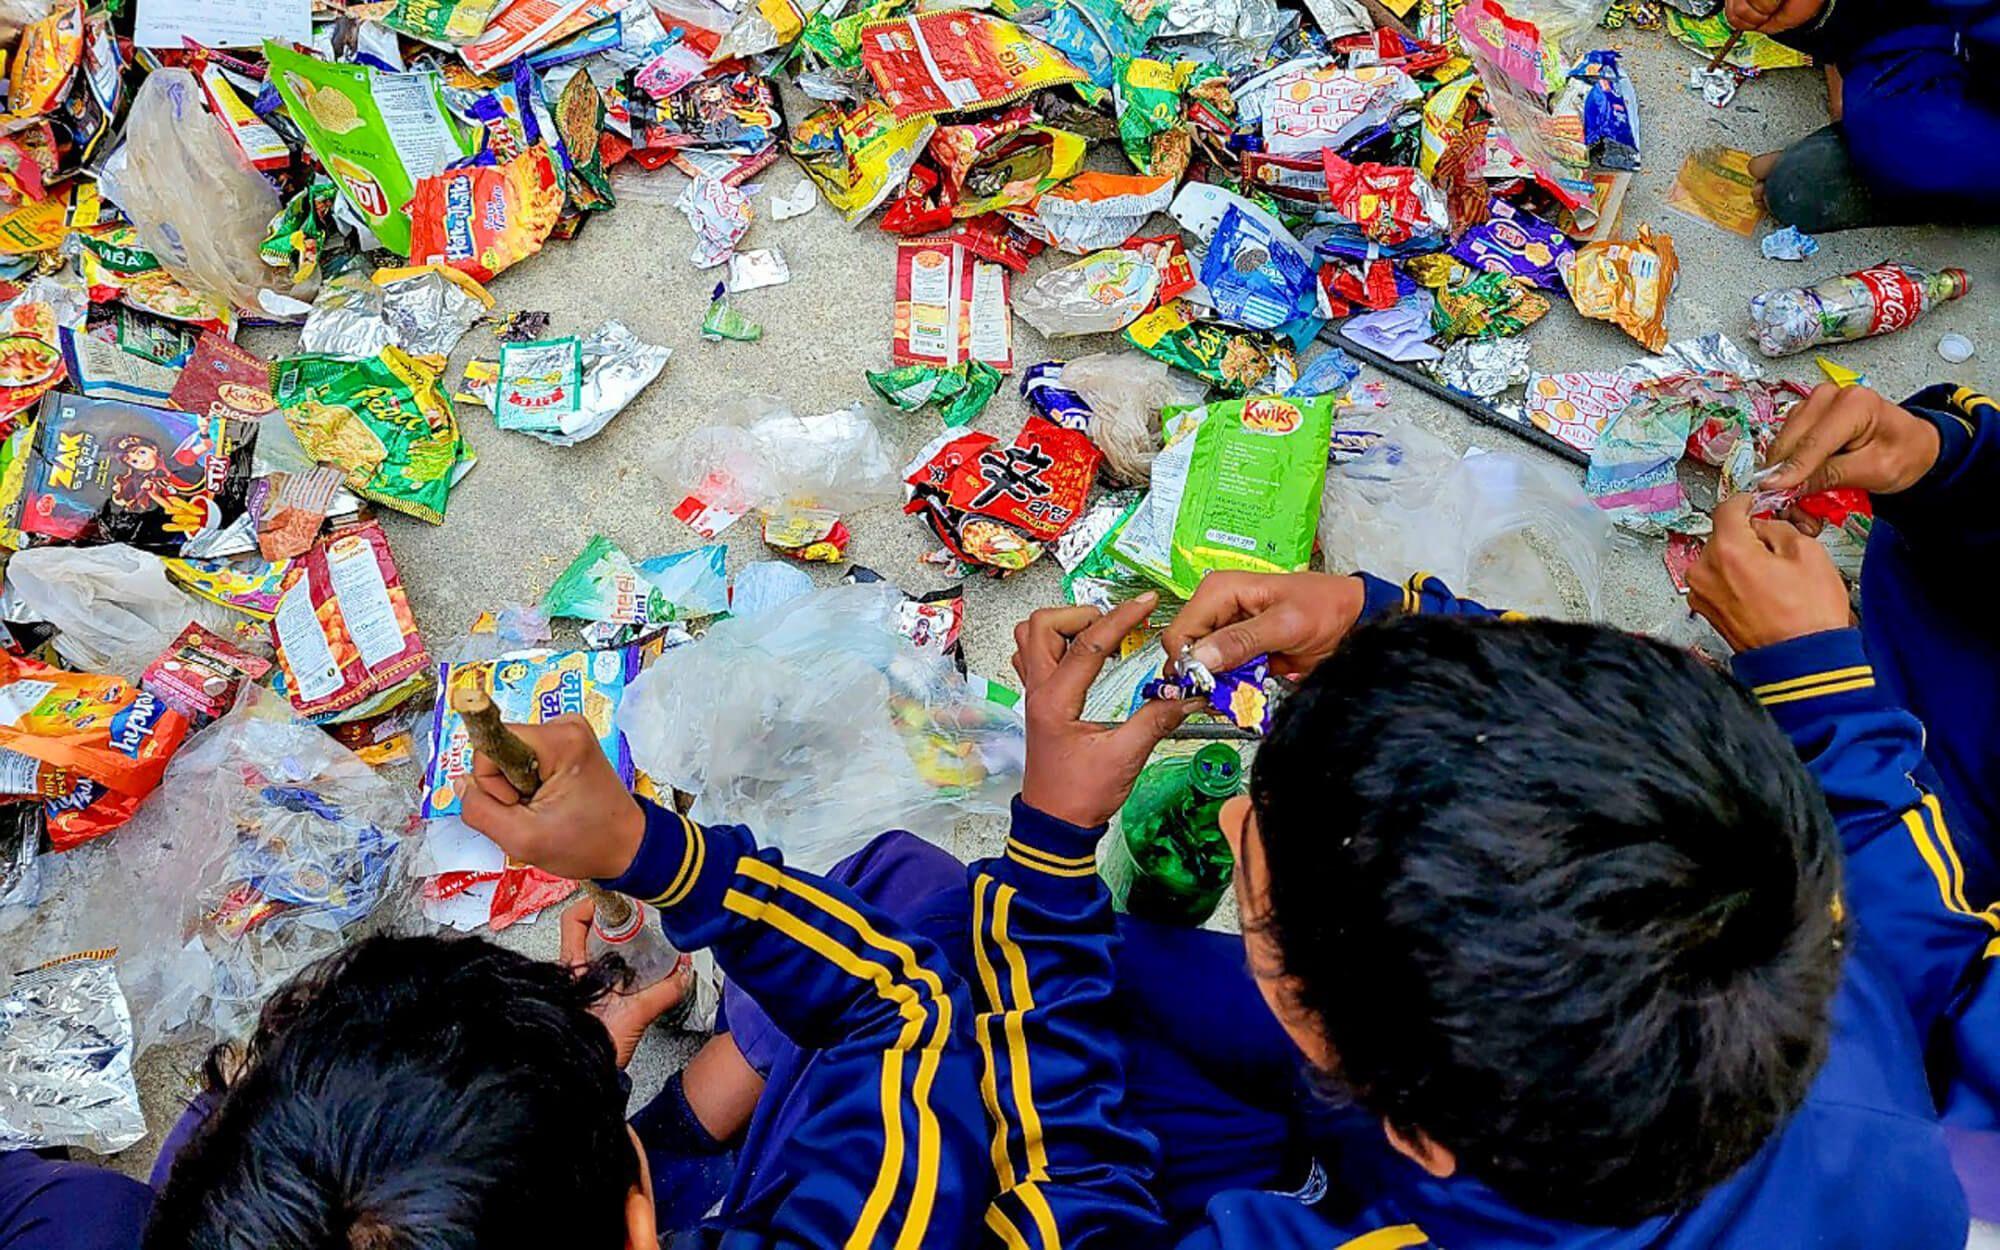 Students collect trash and plastic waste from the mountains, often in exchange for sweets.
Photographer: Kyu-hyun Kim